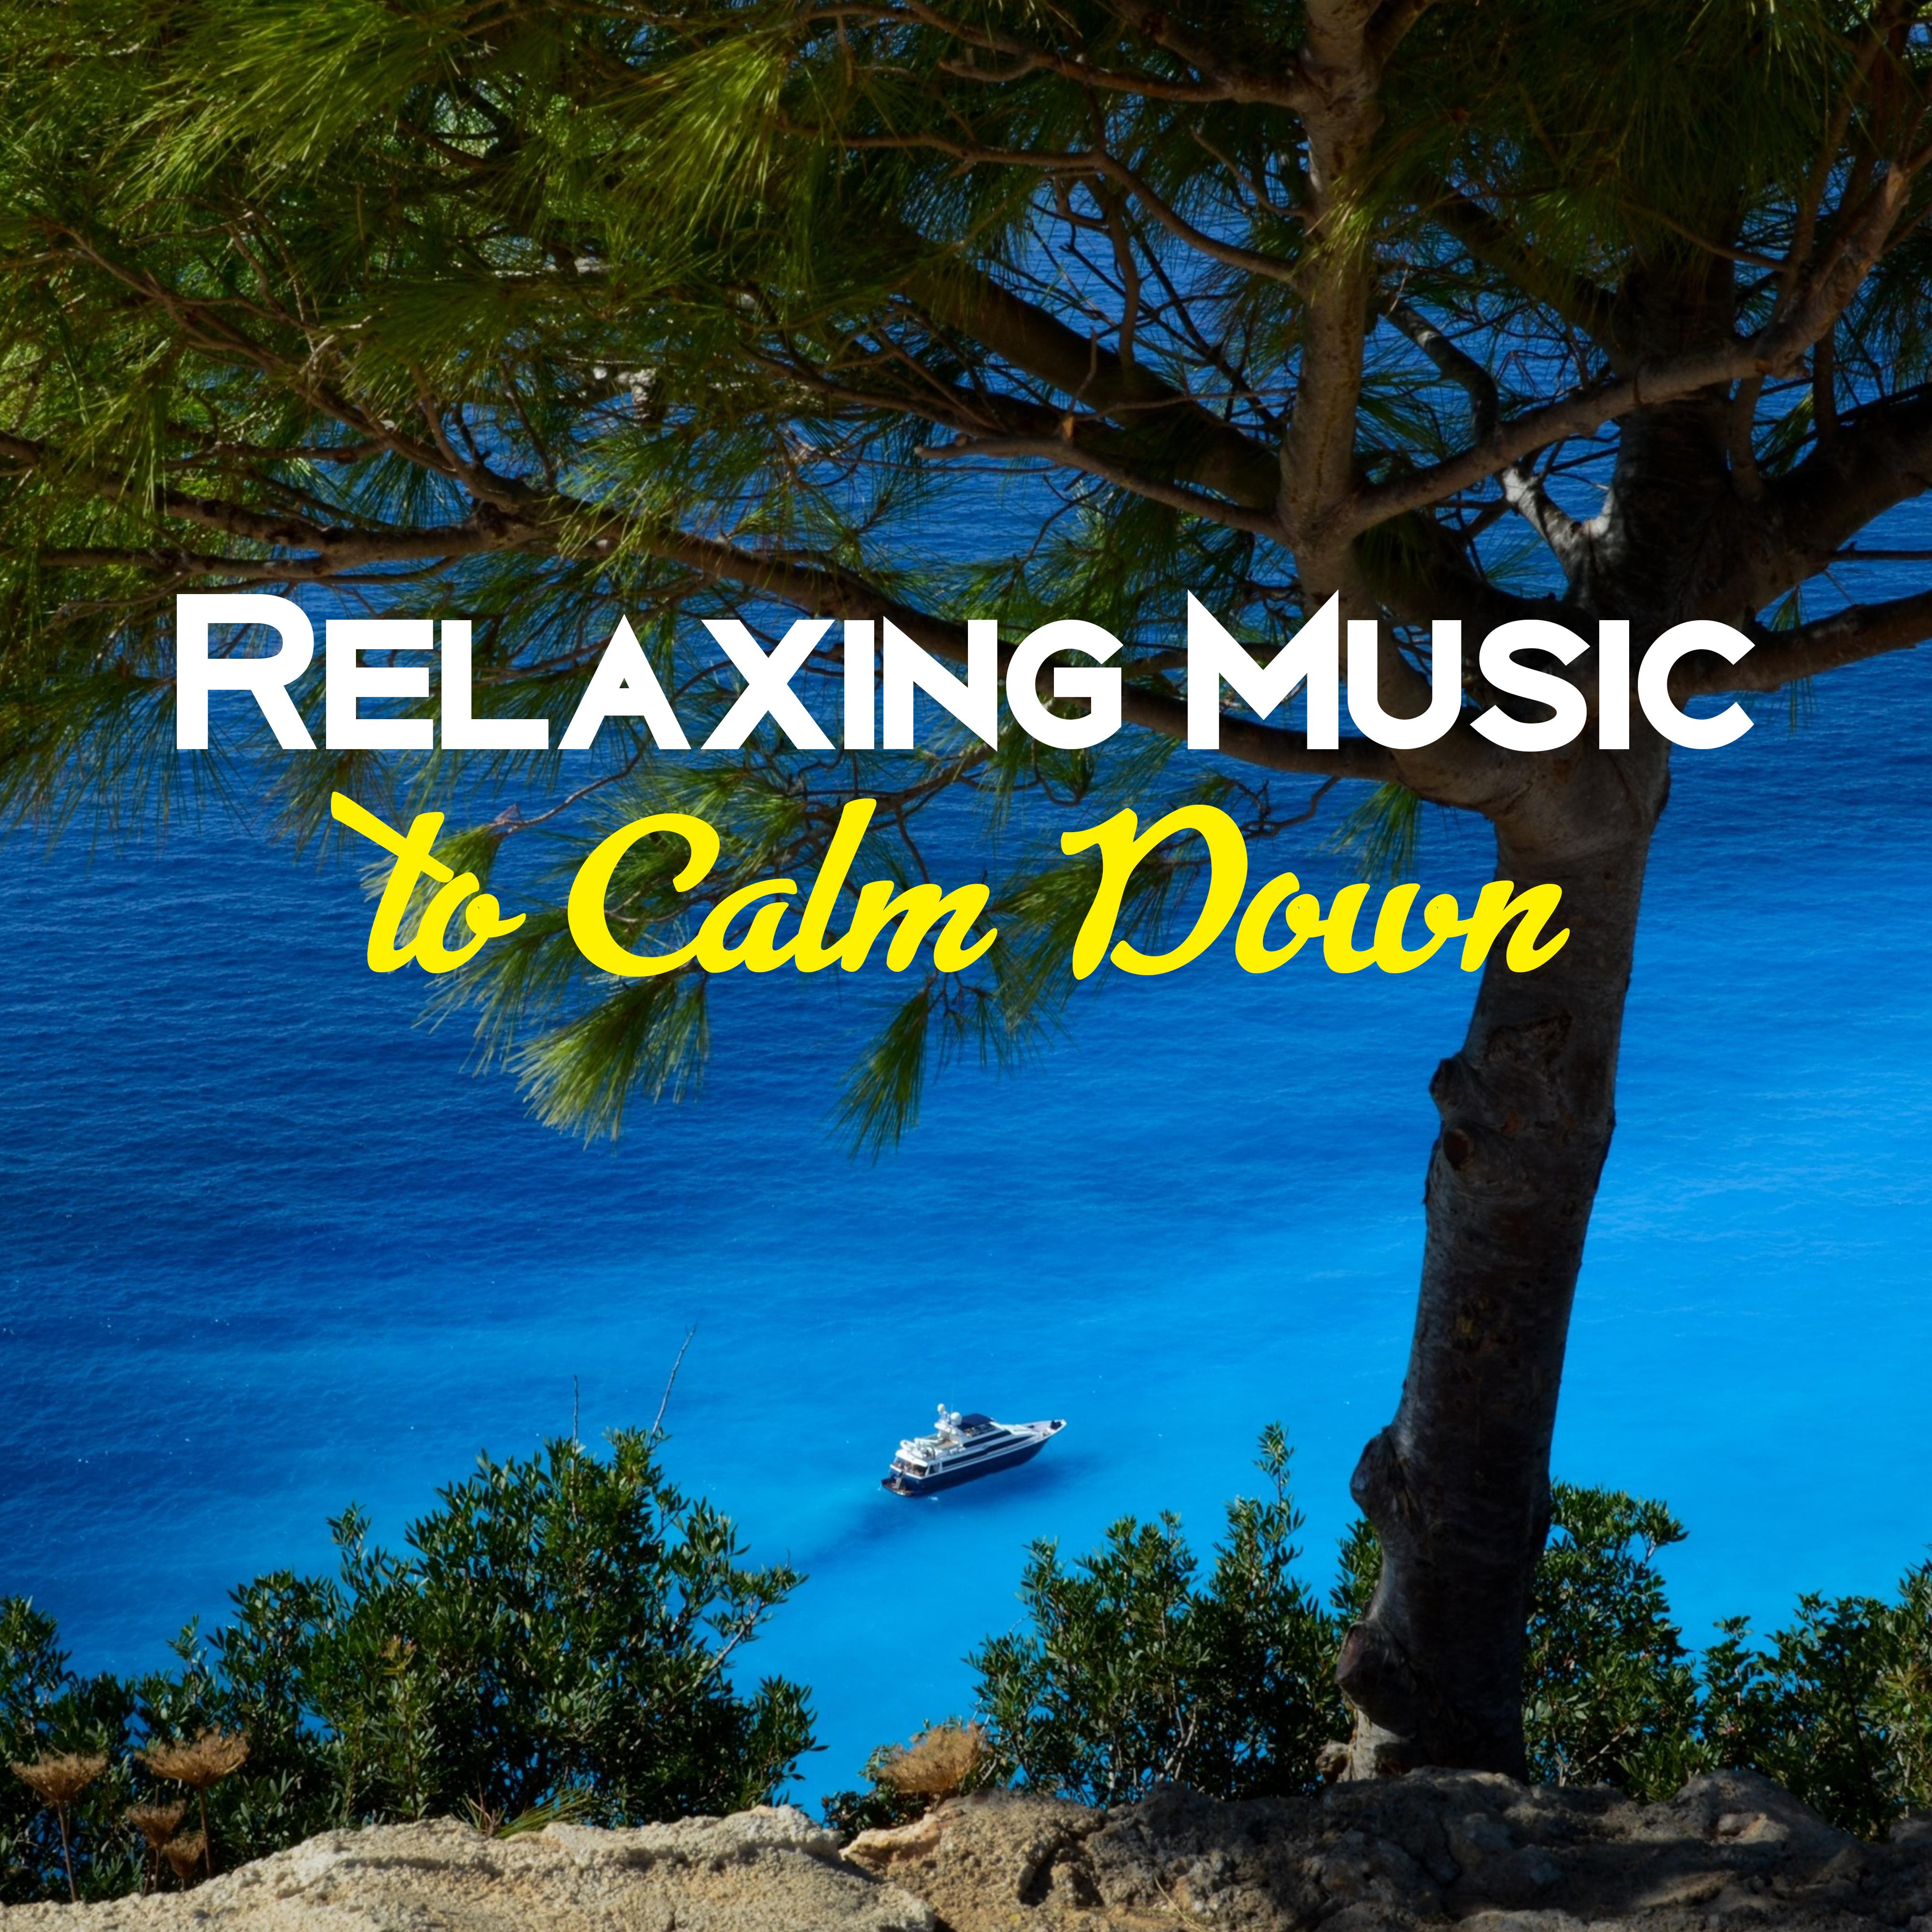 Relaxing Music to Calm Down – Chill Out 2017, Summer Chill, Relax on the Beach, Lounge Summer, Inner Zen